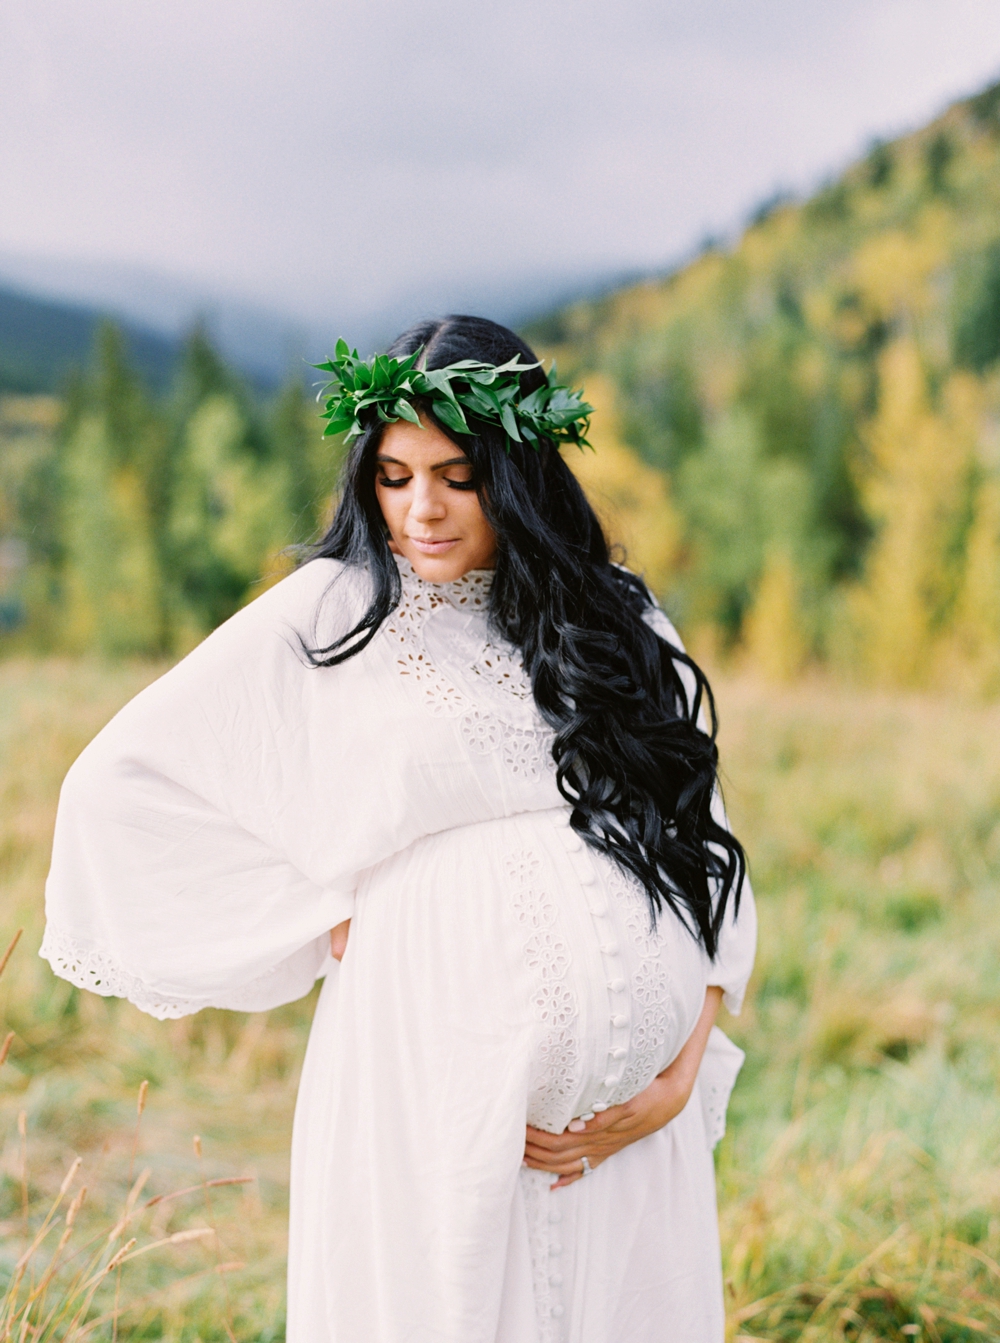 Calgary Maternity Photographers | Pregnancy Photography | Convey The Moment Blogger | Canmore Banff Maternity Session